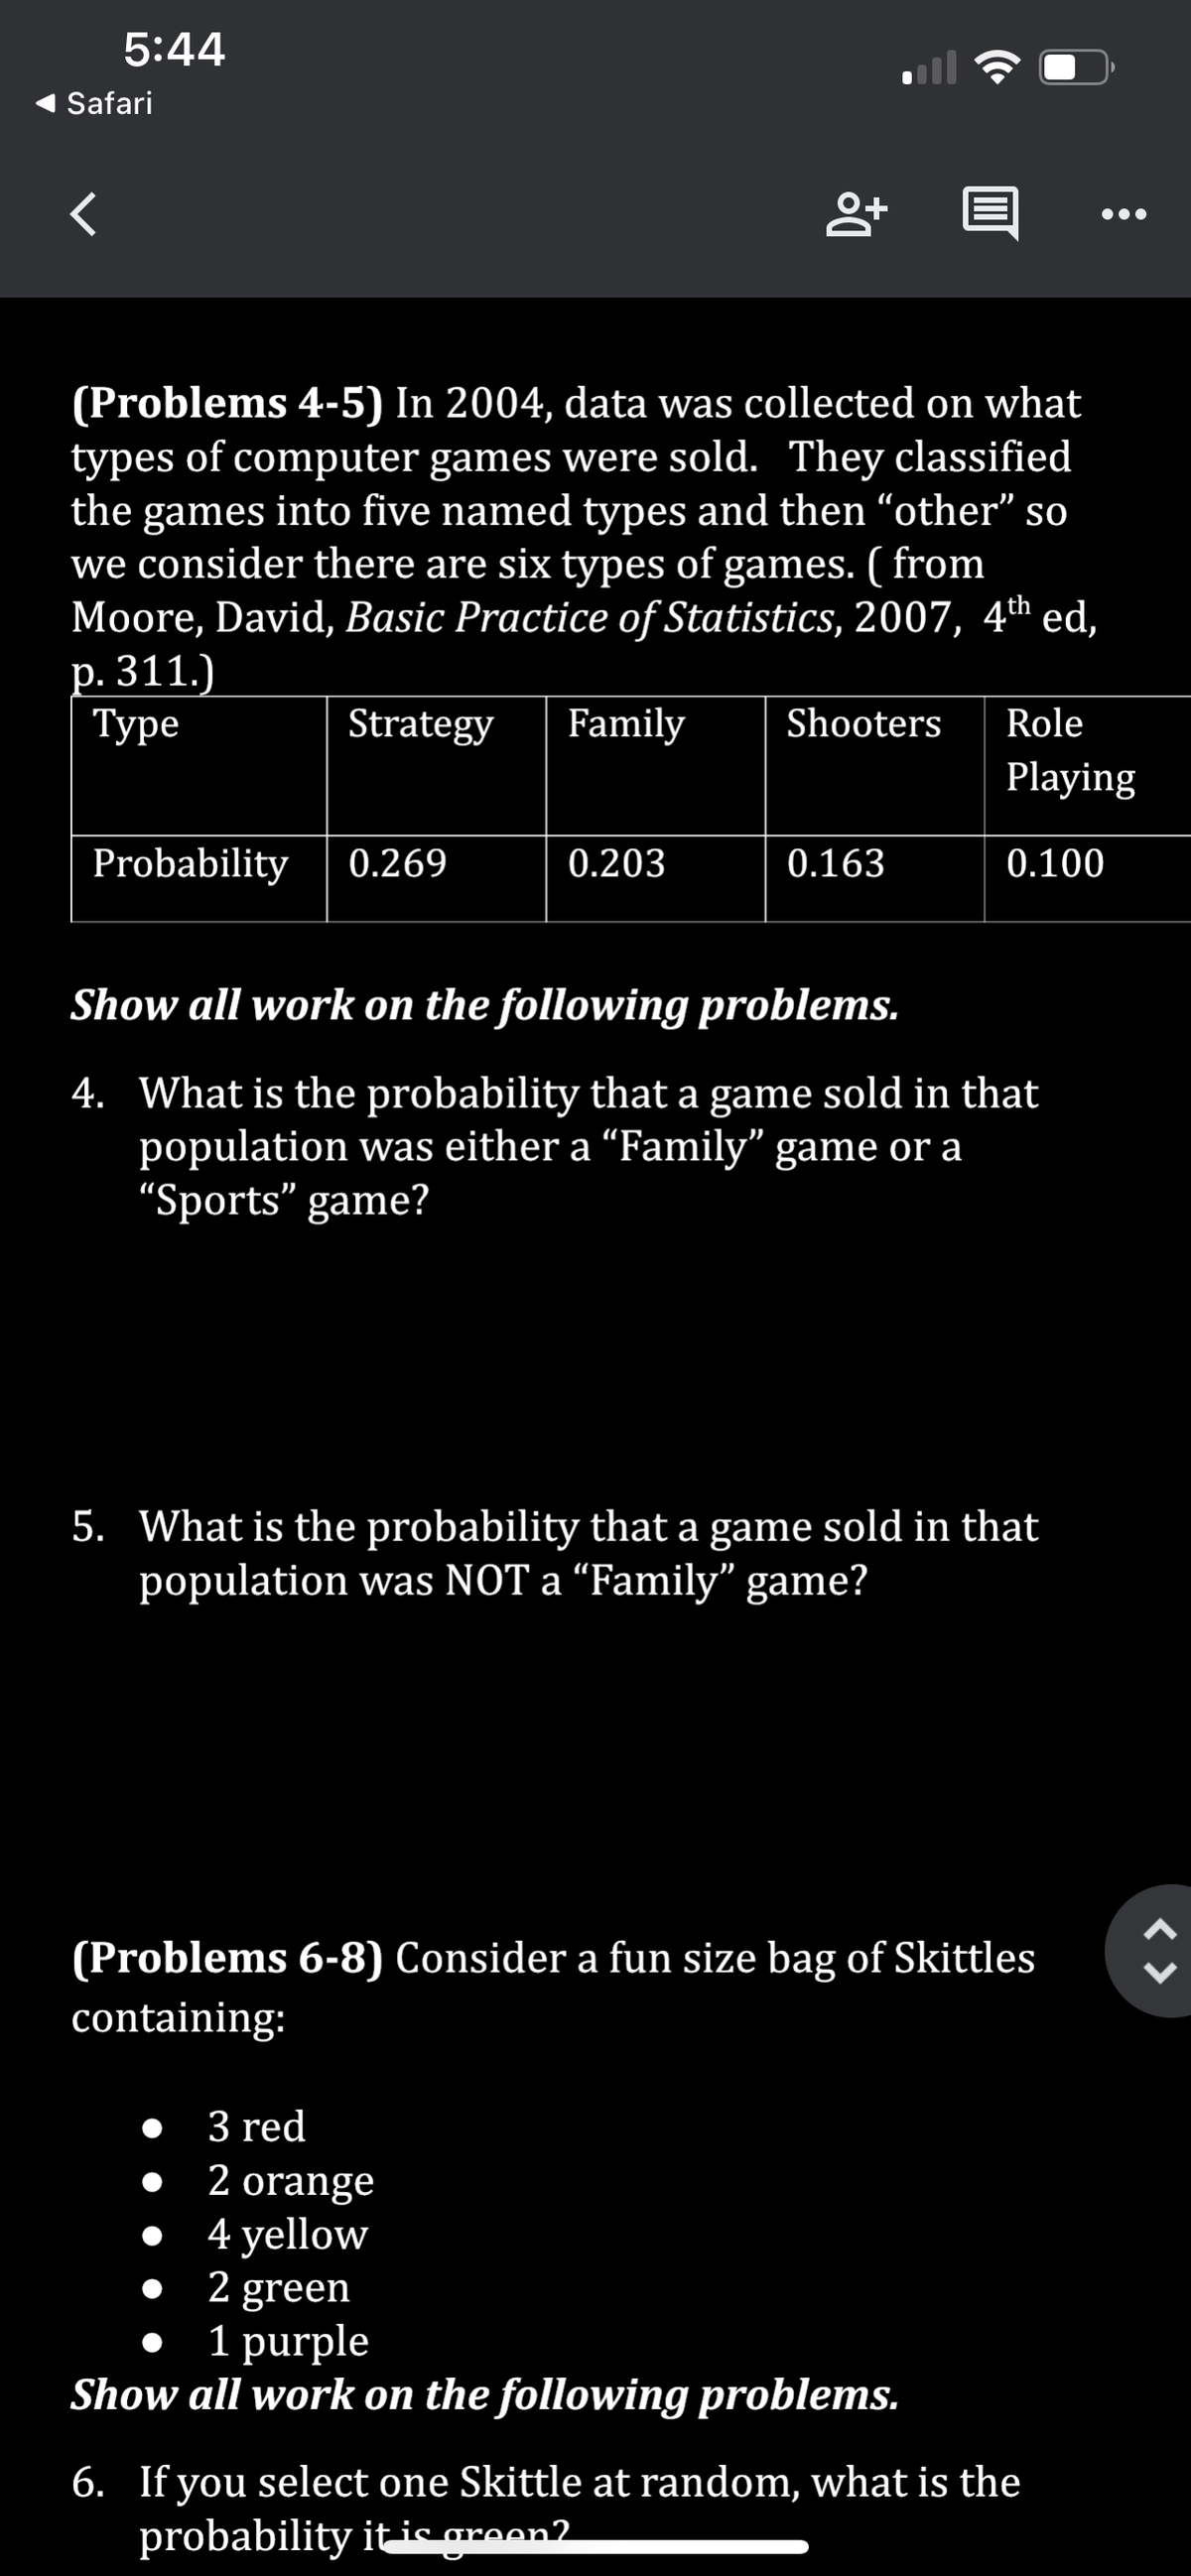 5:44
Safari
<
(Problems 4-5) In 2004, data was collected on what
types of computer games were sold. They classified
the games into five named types and then "other" so
we consider there are six types of games. ( from
Moore, David, Basic Practice of Statistics, 2007, 4th ed,
p. 311.)
Туре
Family
Strategy
Probability 0.269
8+
0.203
• 3 red
•
Shooters
0.163
Show all work on the following problems.
4. What is the probability that a game sold in that
population was either a "Family" game or a
"Sports" game?
Role
Playing
0.100
5. What is the probability that a game sold in that
population was NOT a “Family" game?
(Problems 6-8) Consider a fun size bag of Skittles
containing:
2 orange
4 yellow
2 green
1 purple
Show all work on the following problems.
6. If you select one Skittle at random, what is the
probability it is green?
<>